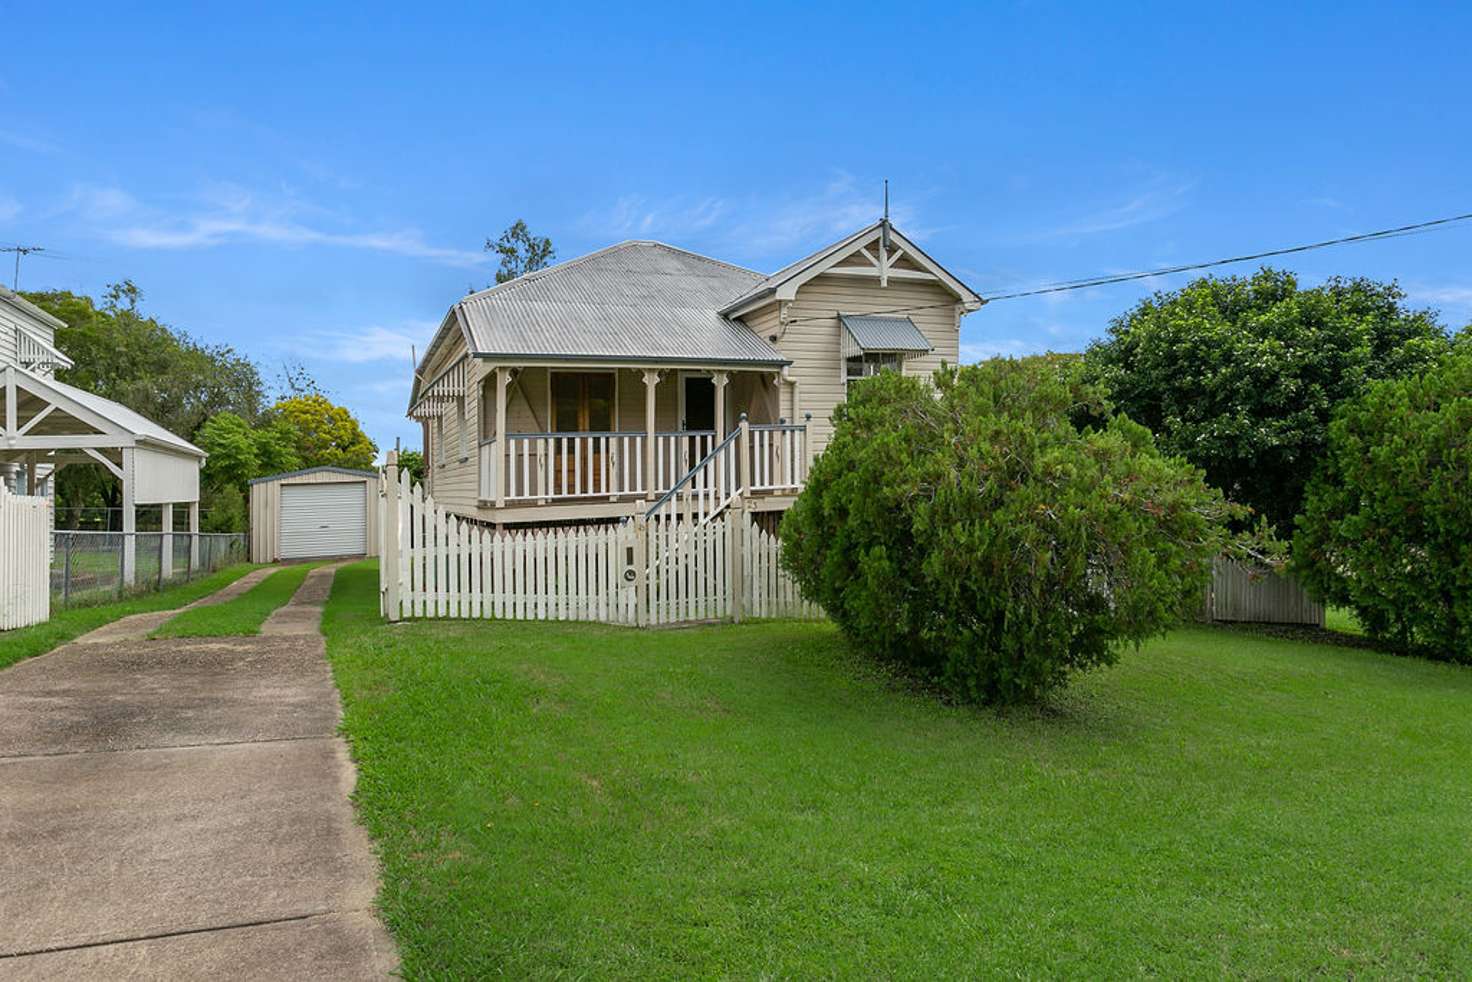 Main view of Homely house listing, 23 Macalister St, Ipswich QLD 4305